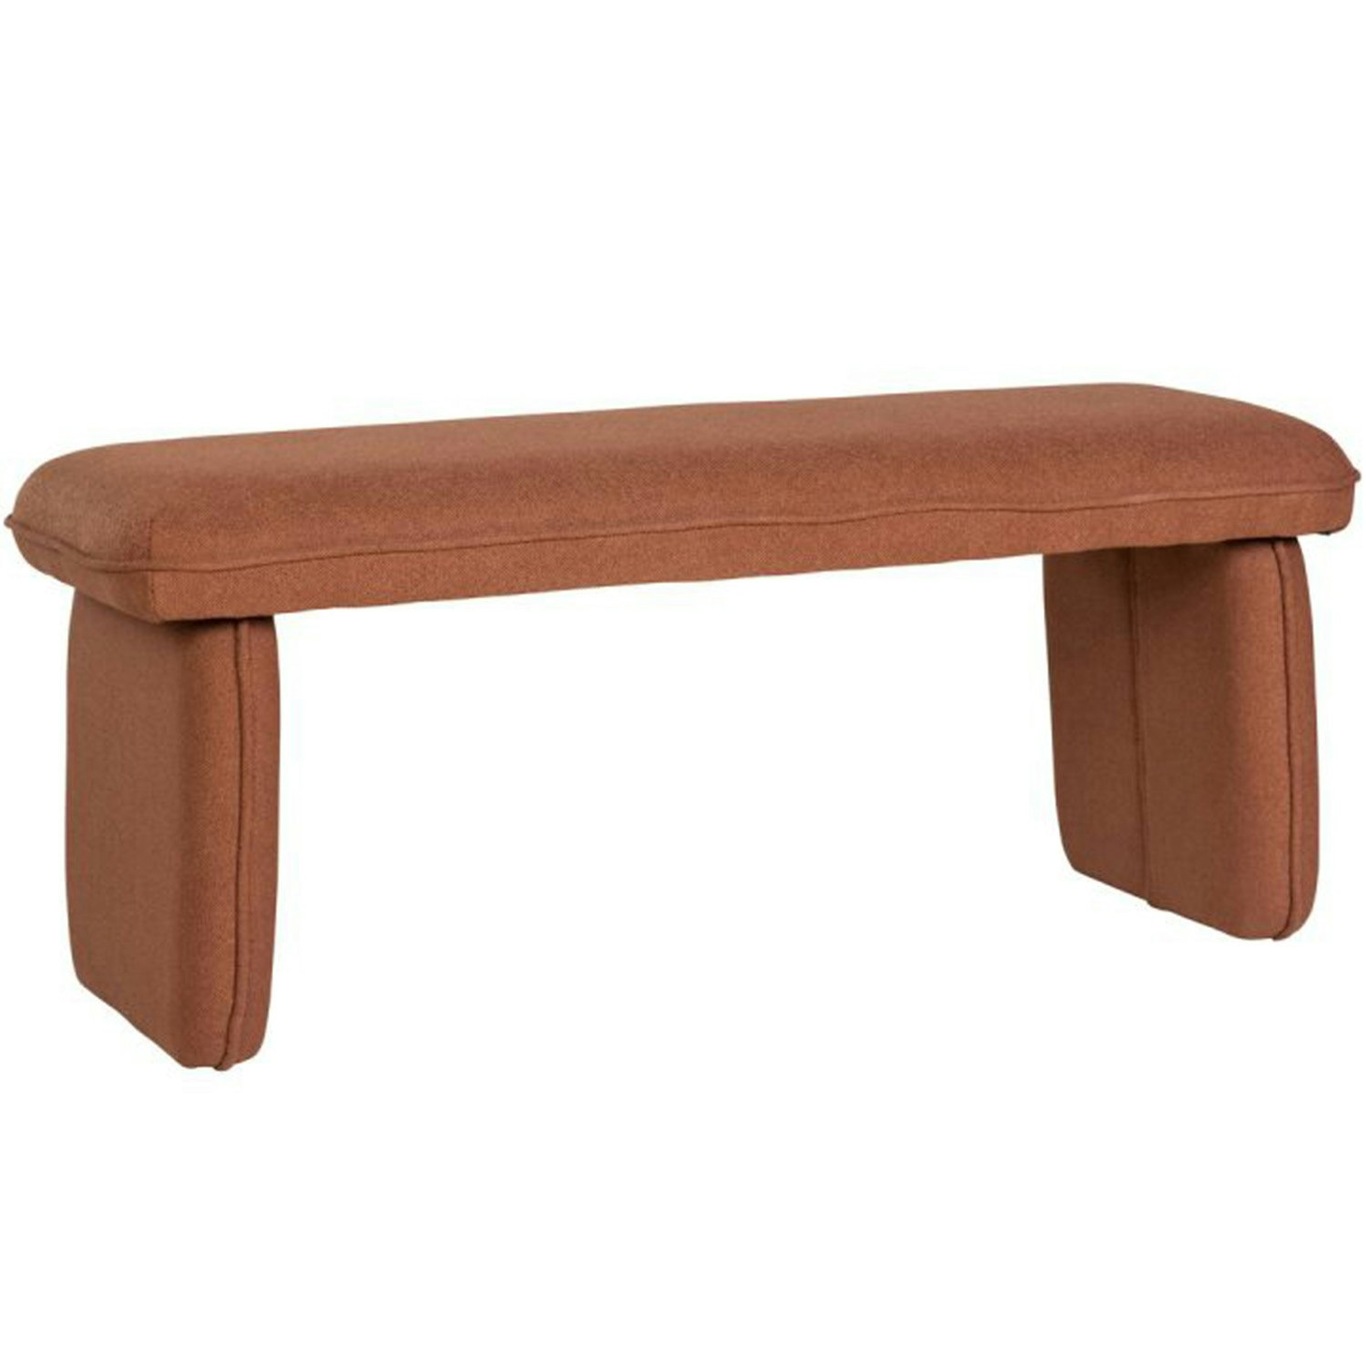 Mellow Bench, Maroon